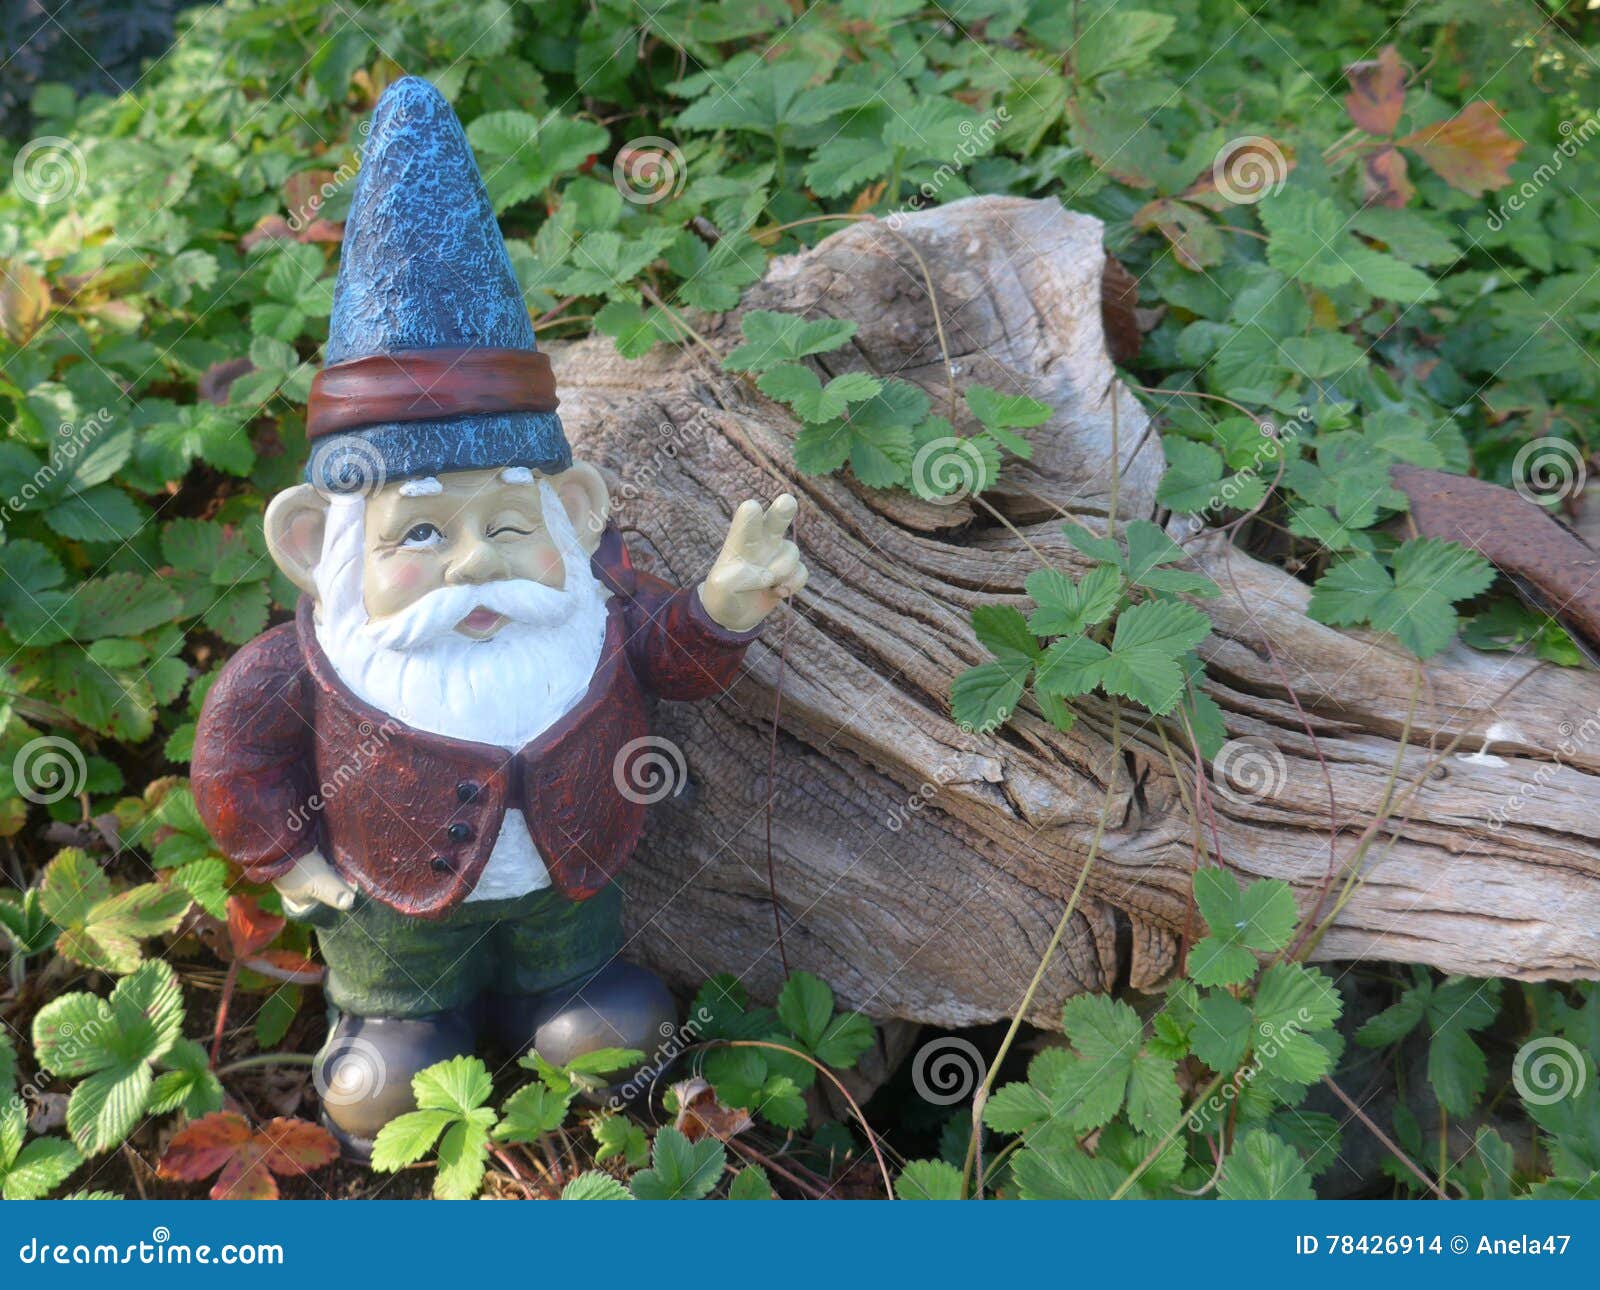 dwarf in front of wooden root